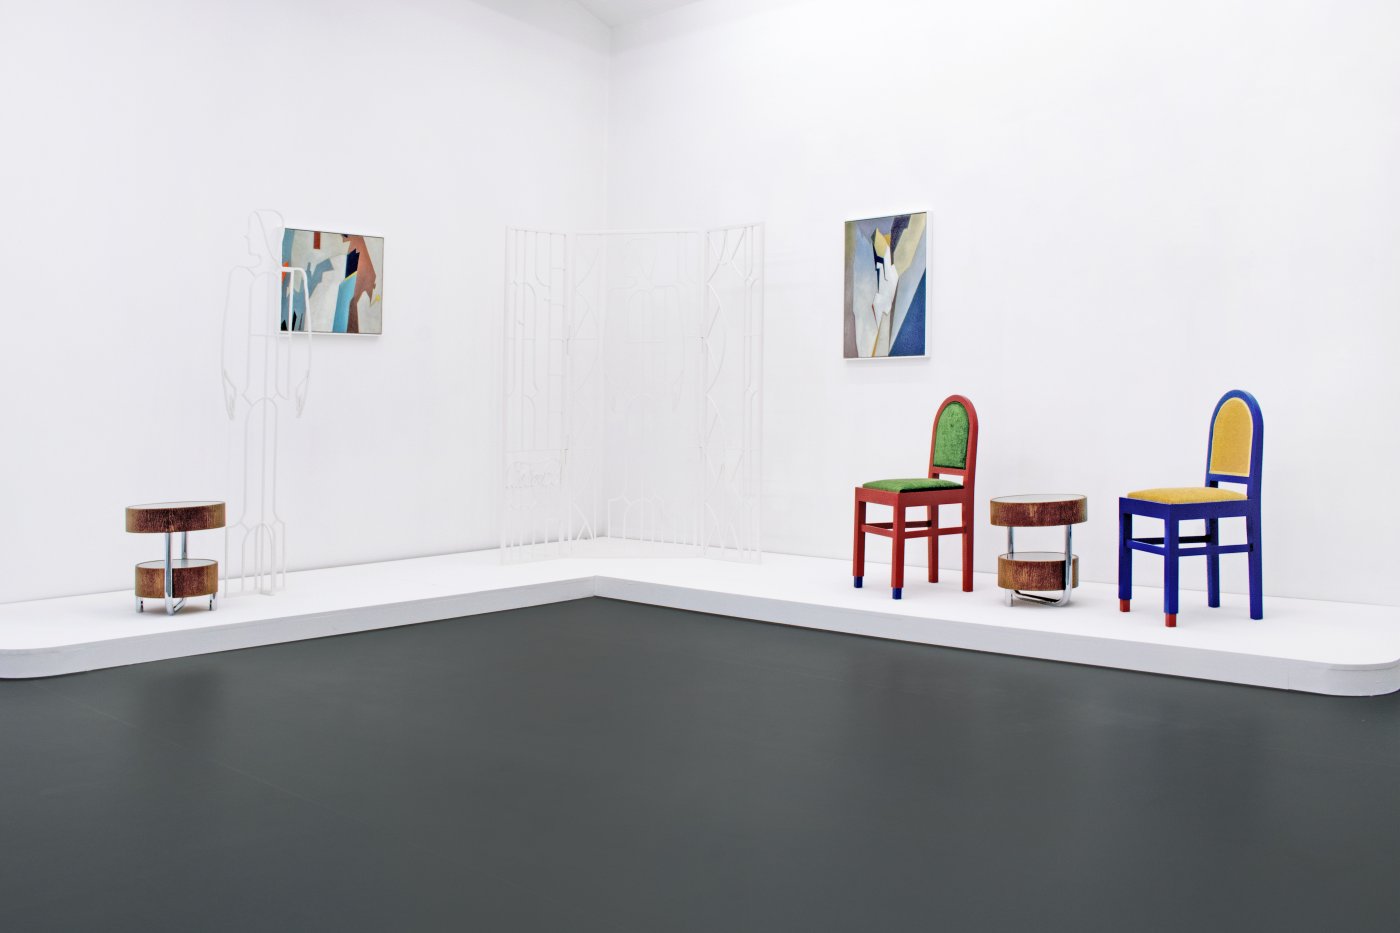 Installation image for Lucy McKenzie & Atelier E.B, at MEYER*KAINER